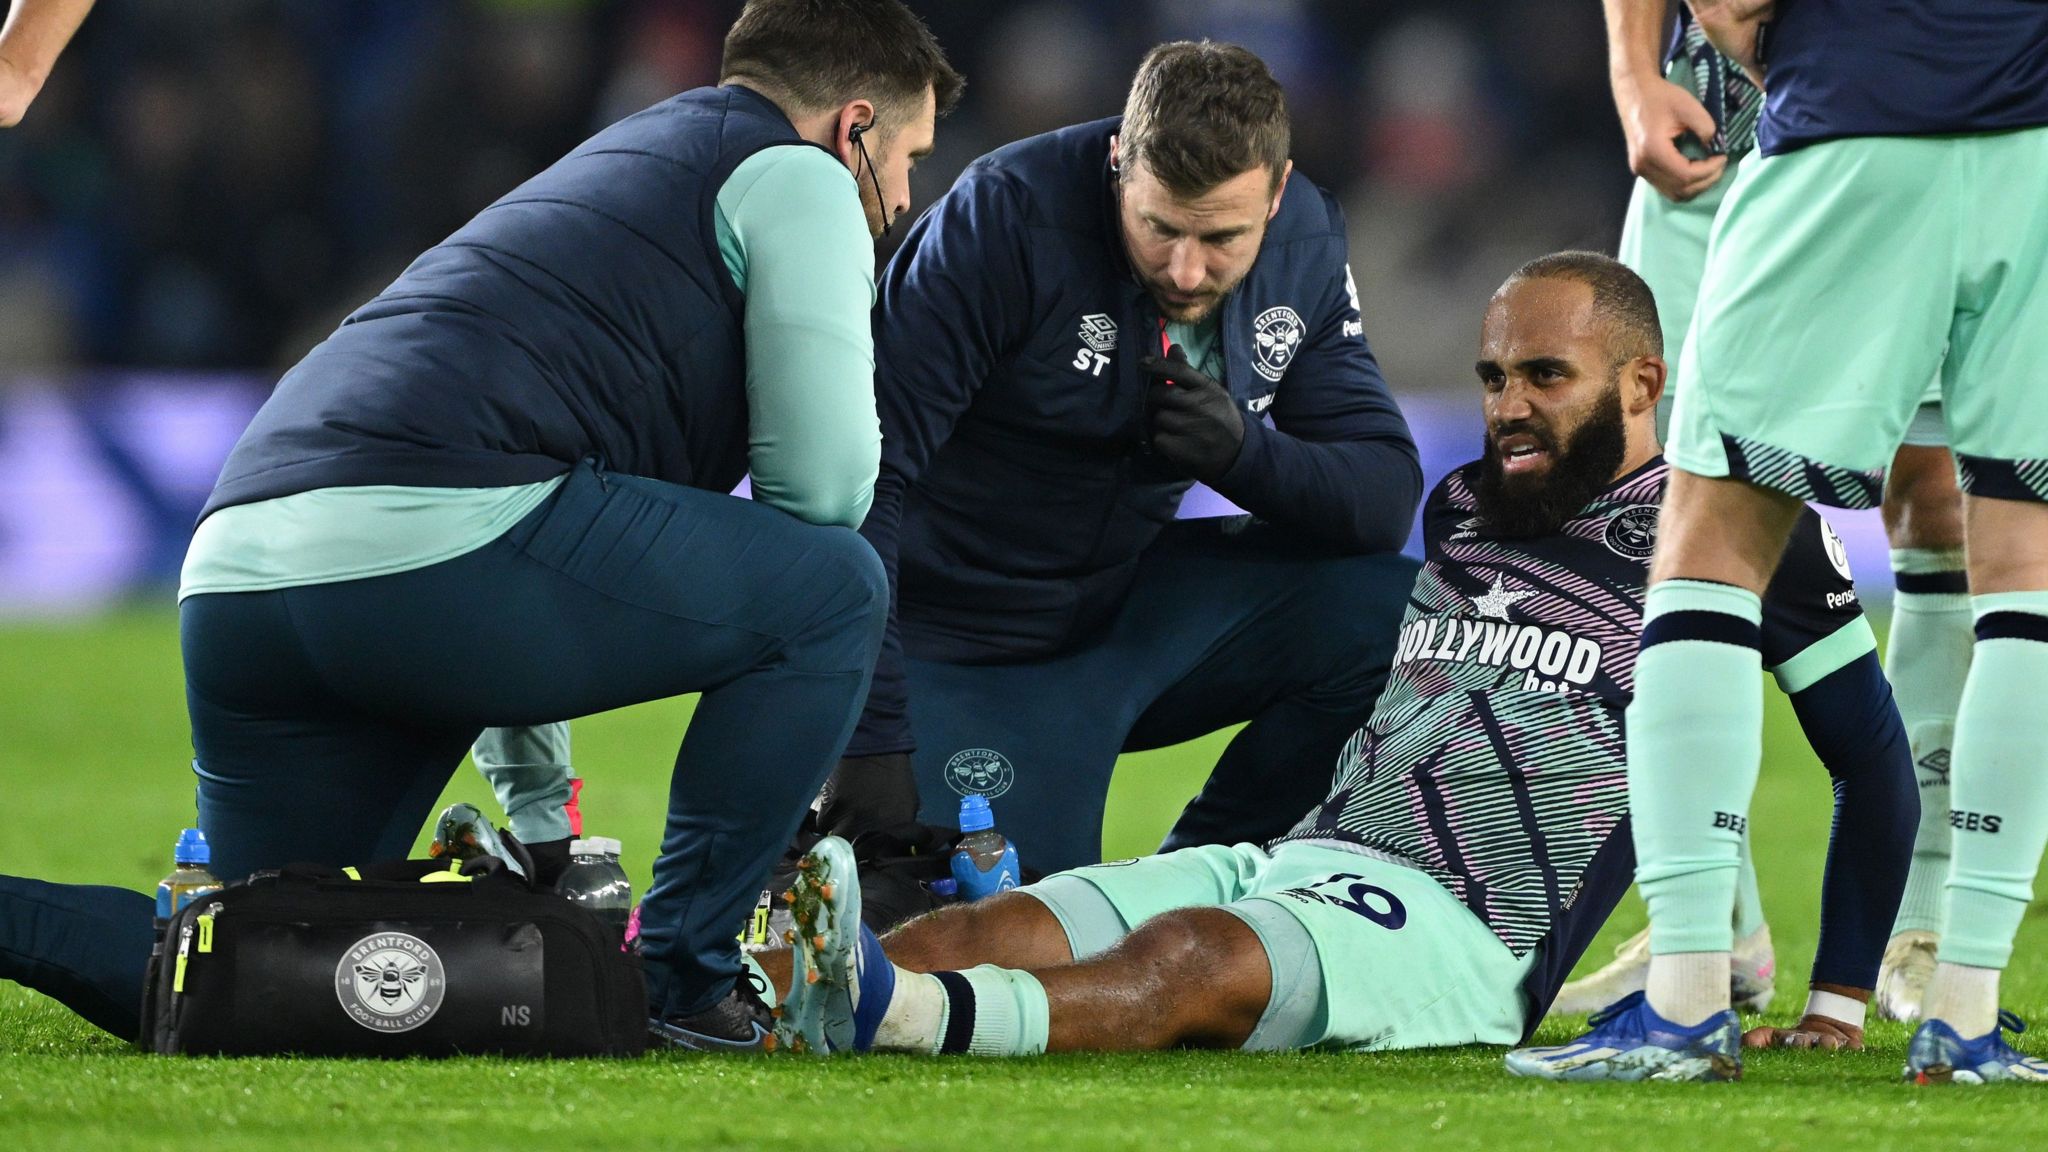 Bryan Mbeumo receives treatment on an injury